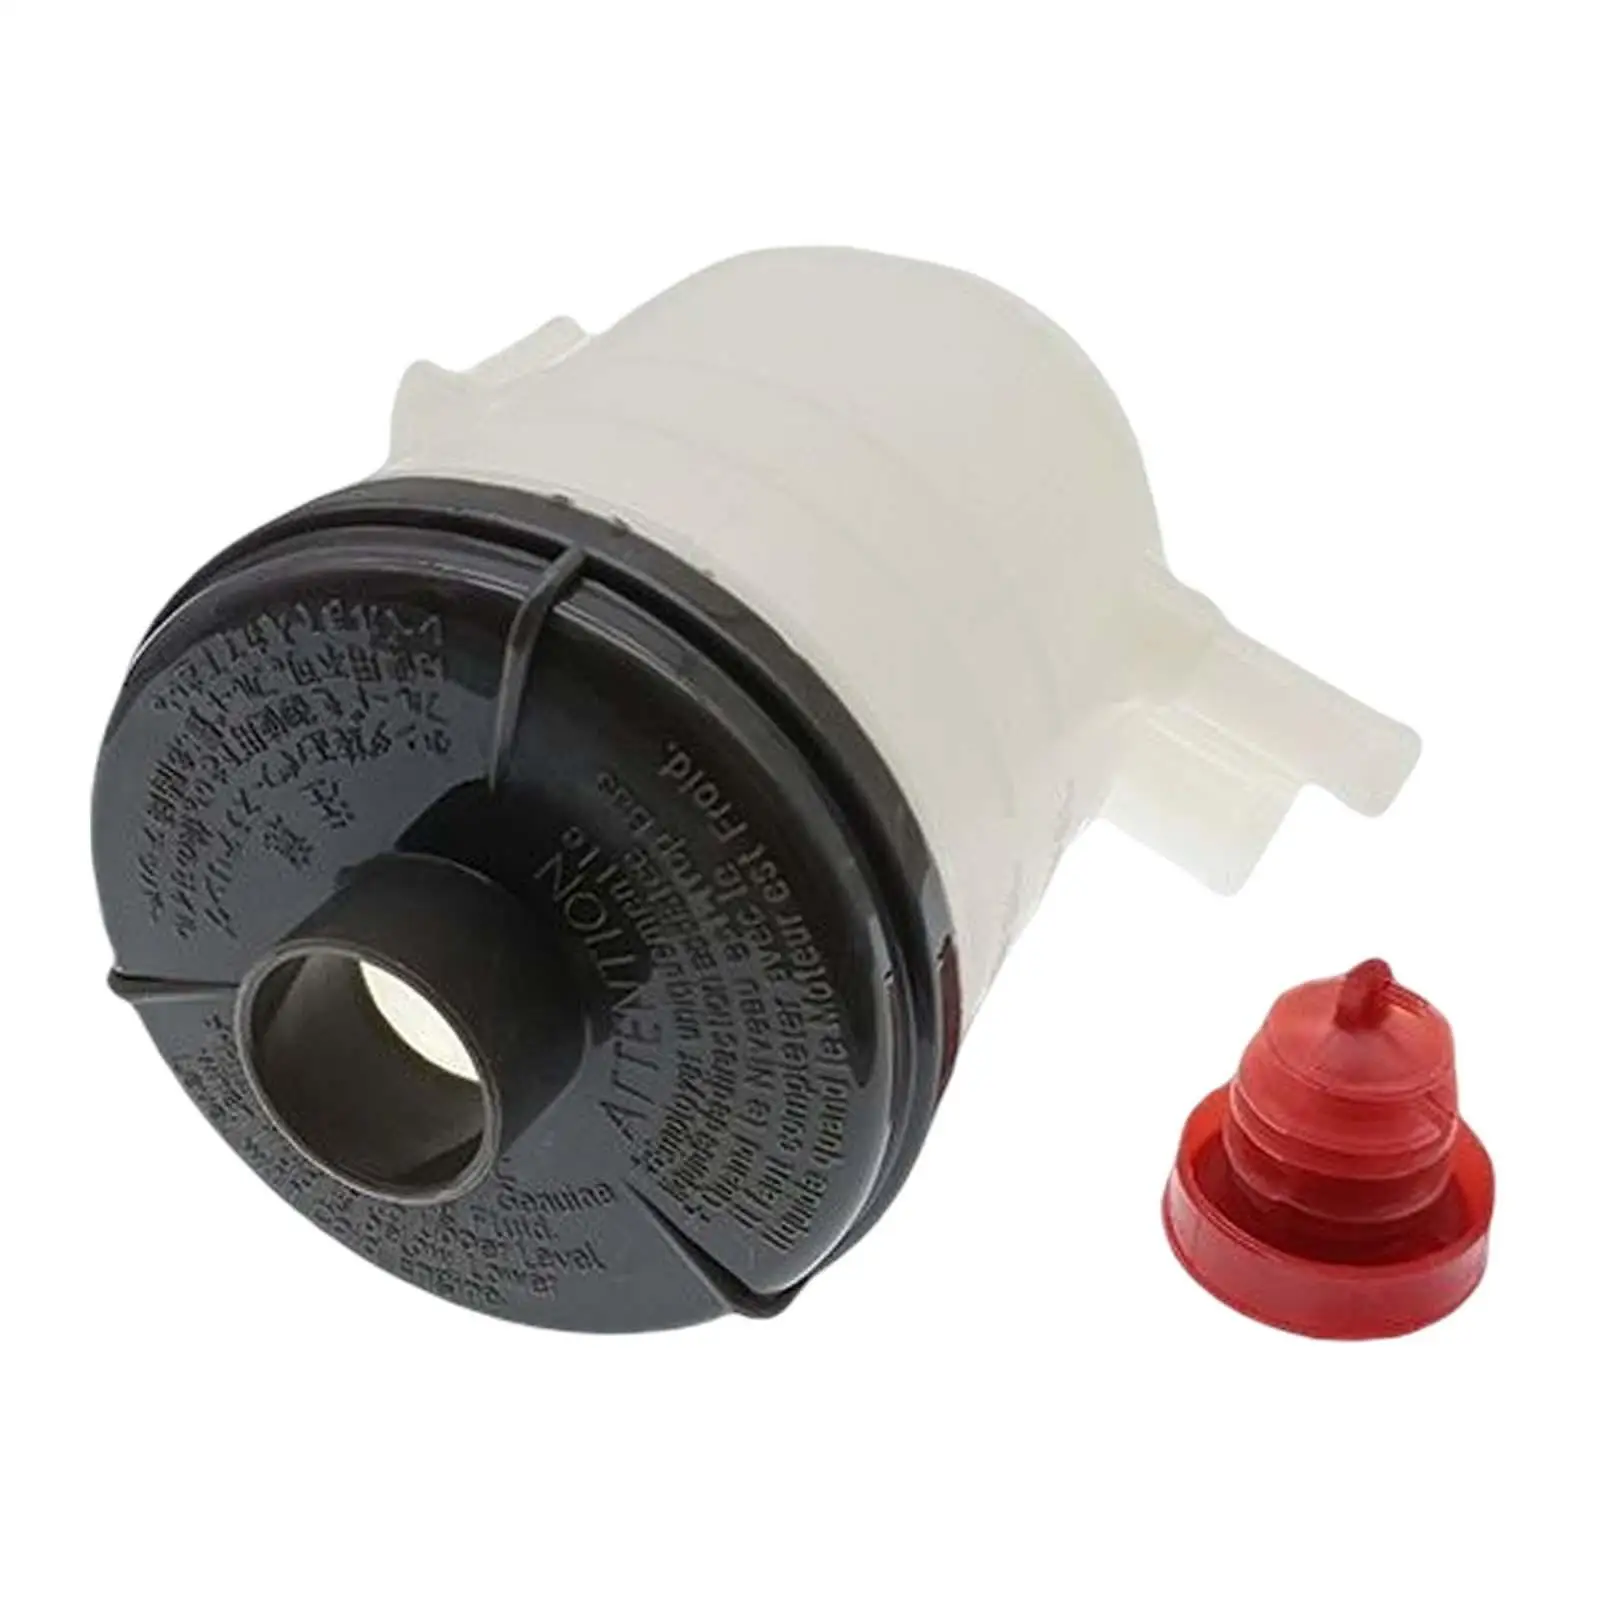 Booster Pump Oil Cup Replaces Durable Spare Parts Practical for Honda Accord 98-02